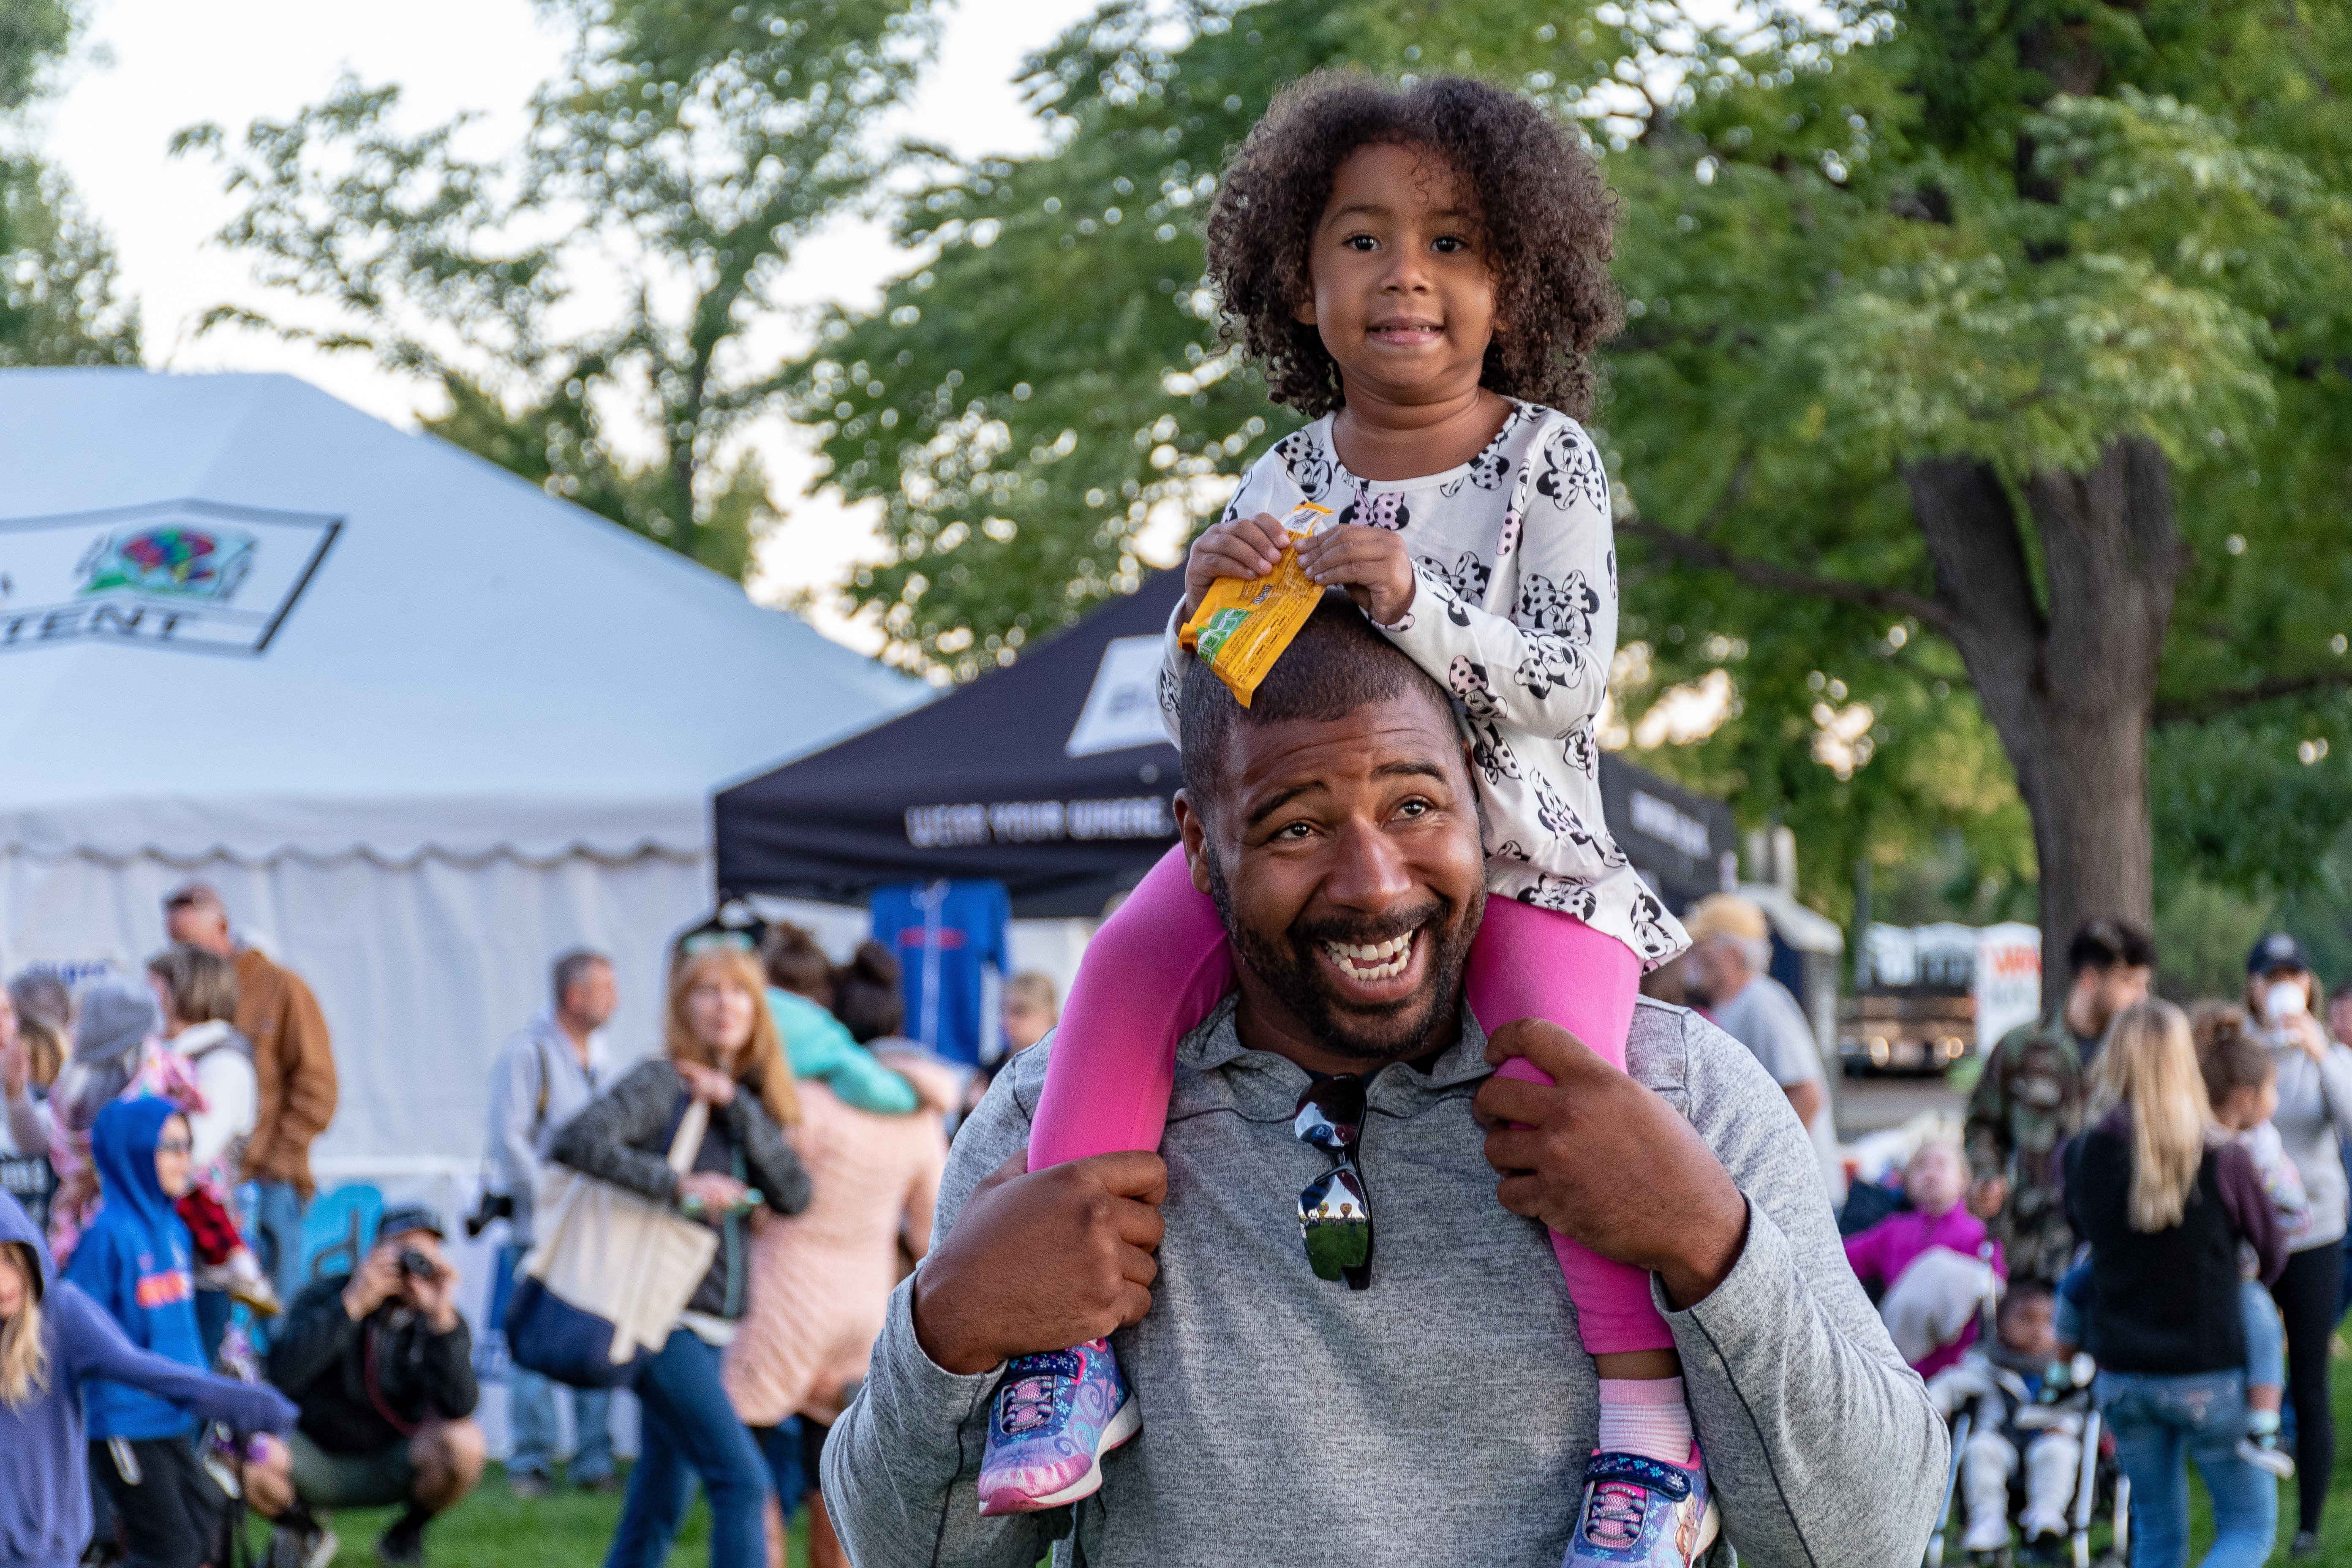 child sitting on parent's shoulders at an event